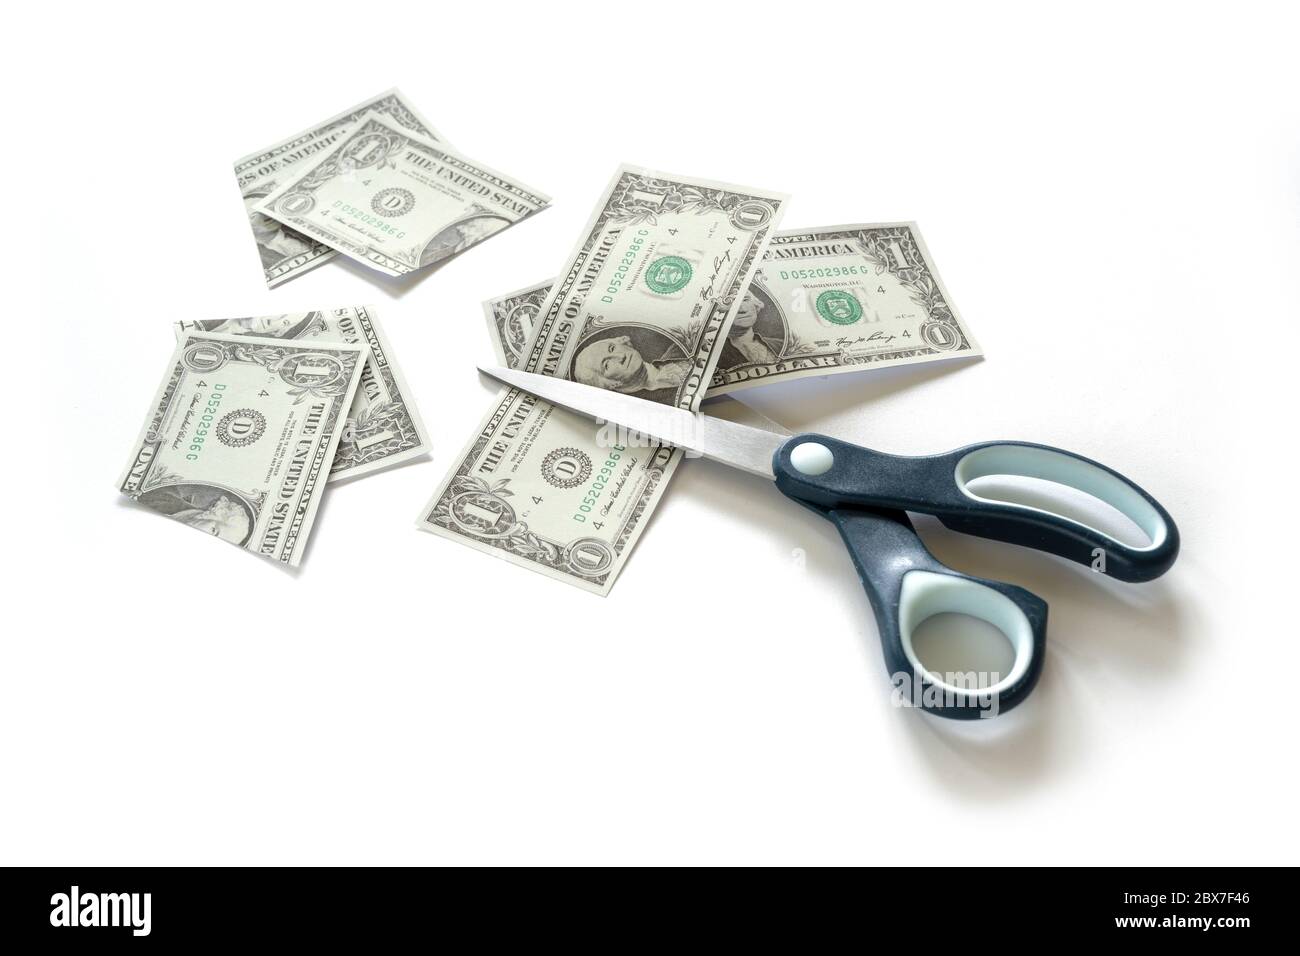 Business concept, one Dollar banknotes are cut with scissors, metaphor for income reduction during a financial crisis like coronavirus pandemic, white Stock Photo